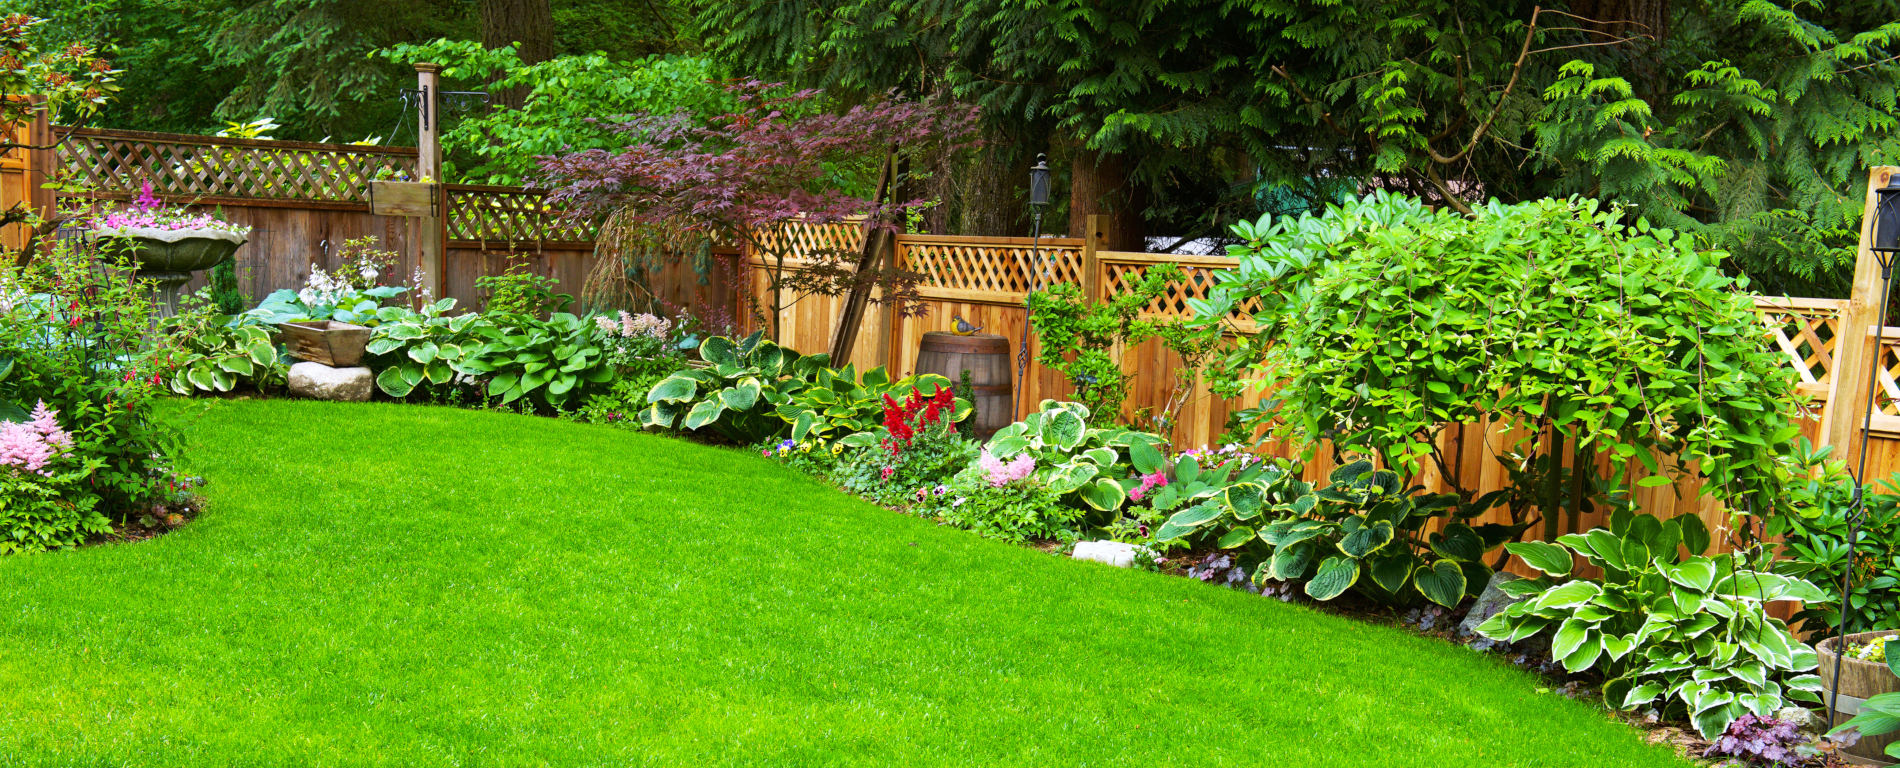 A beautifully arranged and trimmed home garden.